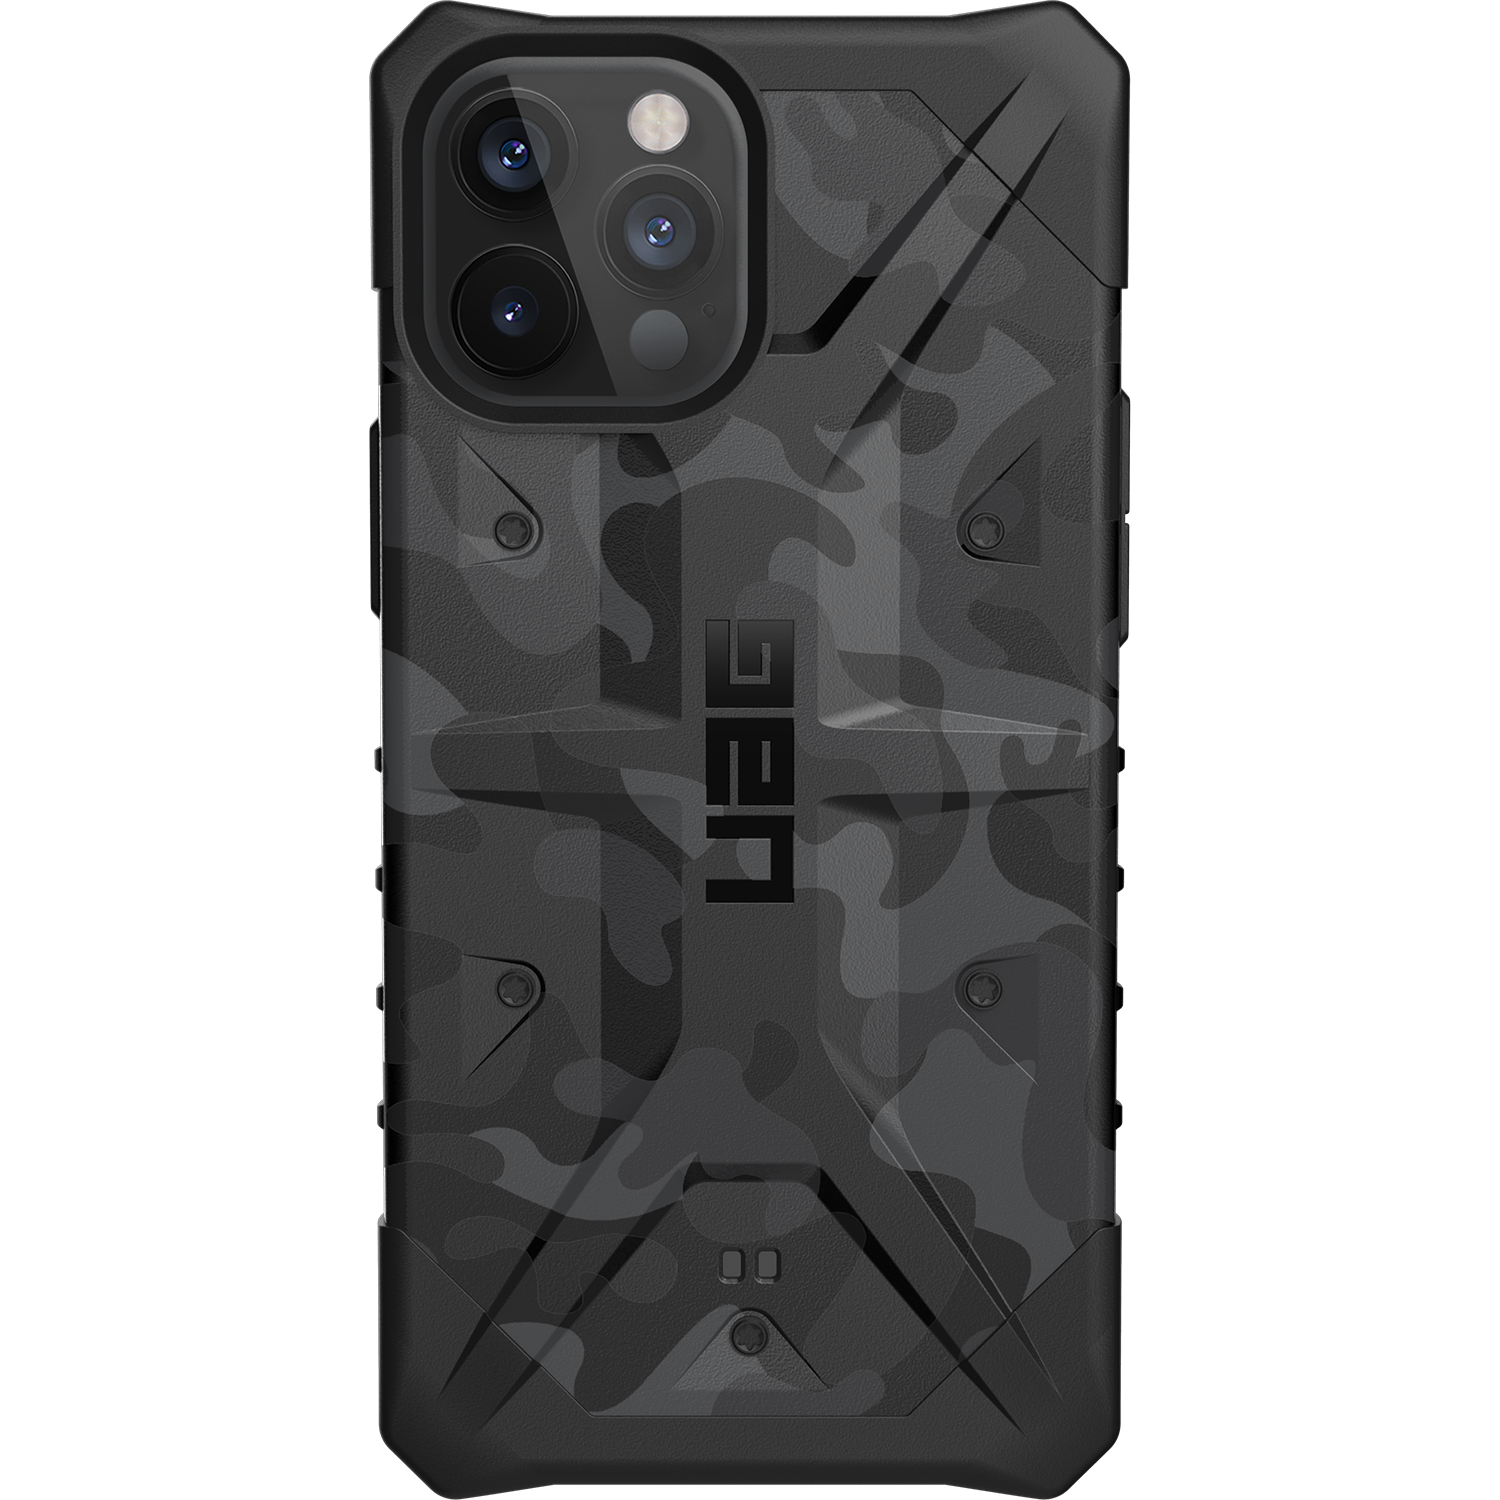 UAG - Pathfinder backcover hoes - iPhone 12 Pro Max - Camouflage Grijs + Lunso Tempered Glass